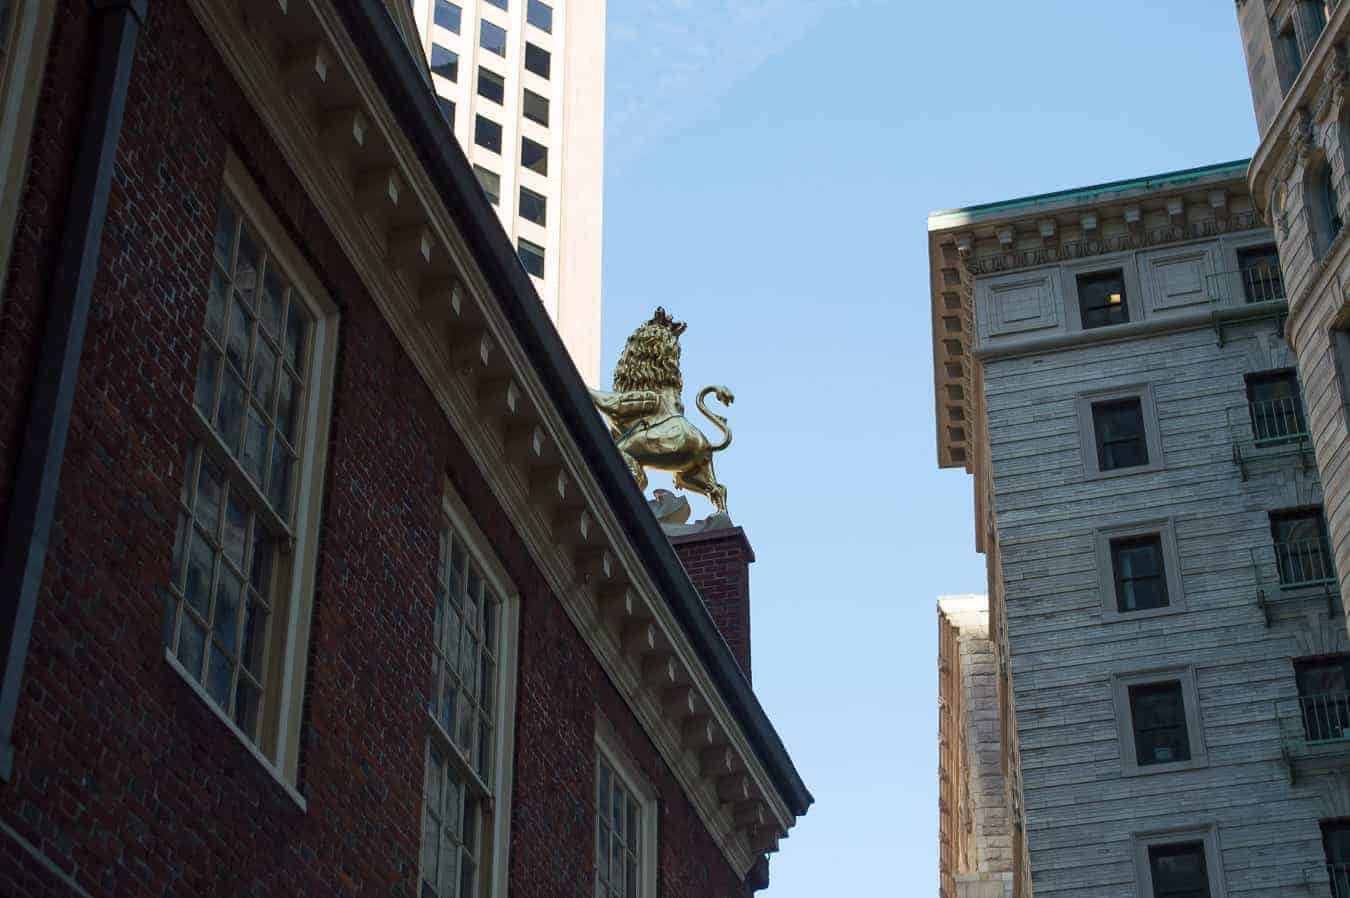 A statue of a golden lion on top of a brick building.